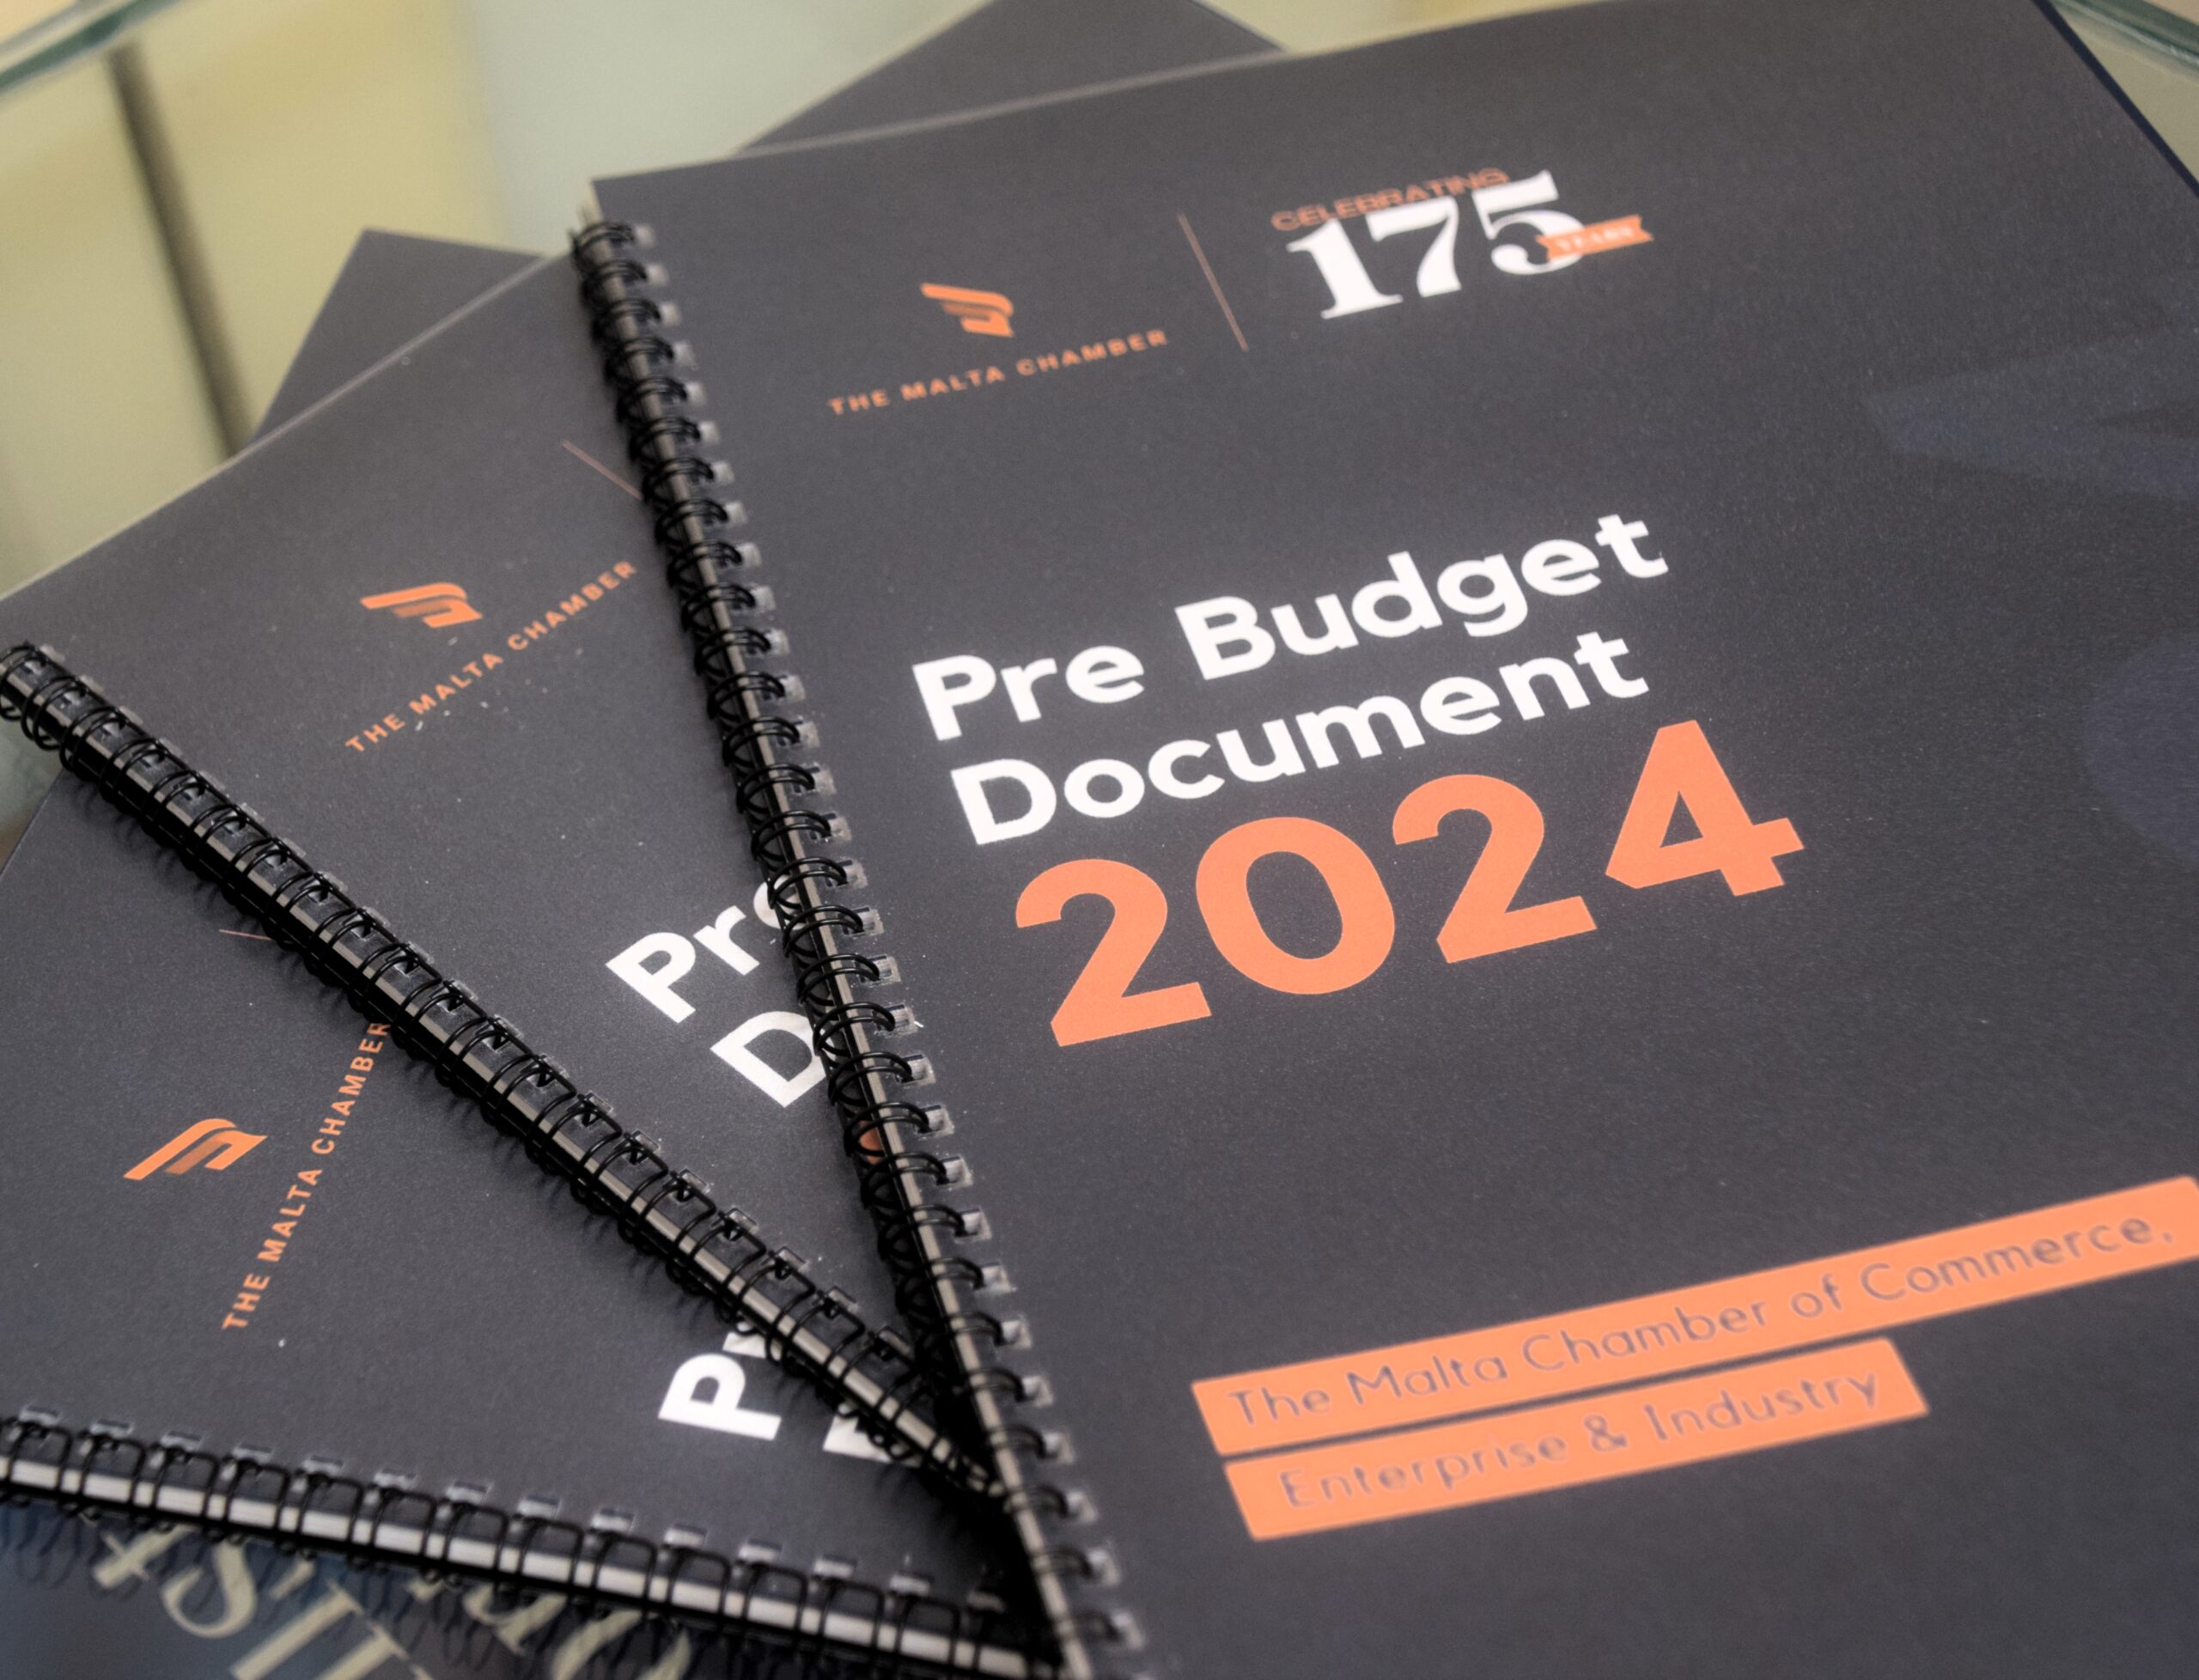 Launch of The Malta Chamber’s Pre Budget Document 2024